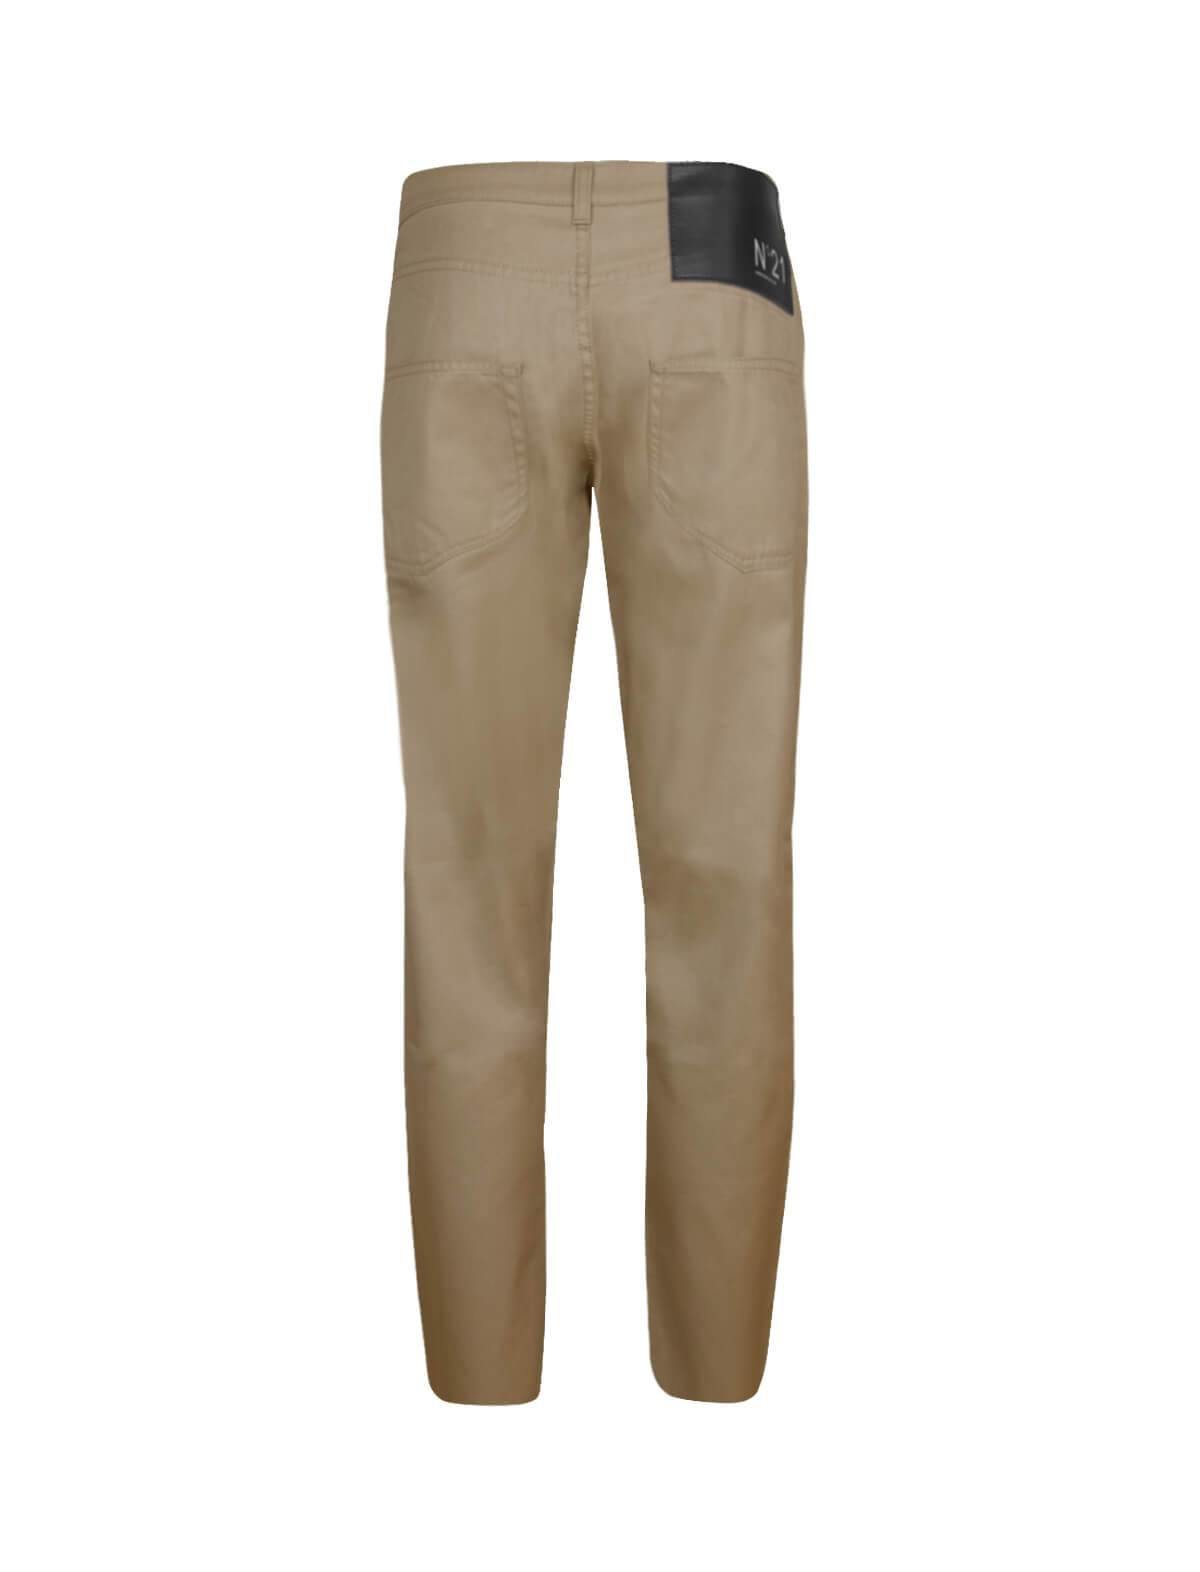 Nº21 Low-rise Straight Jeans In Warm Beige | CLOSET Singapore